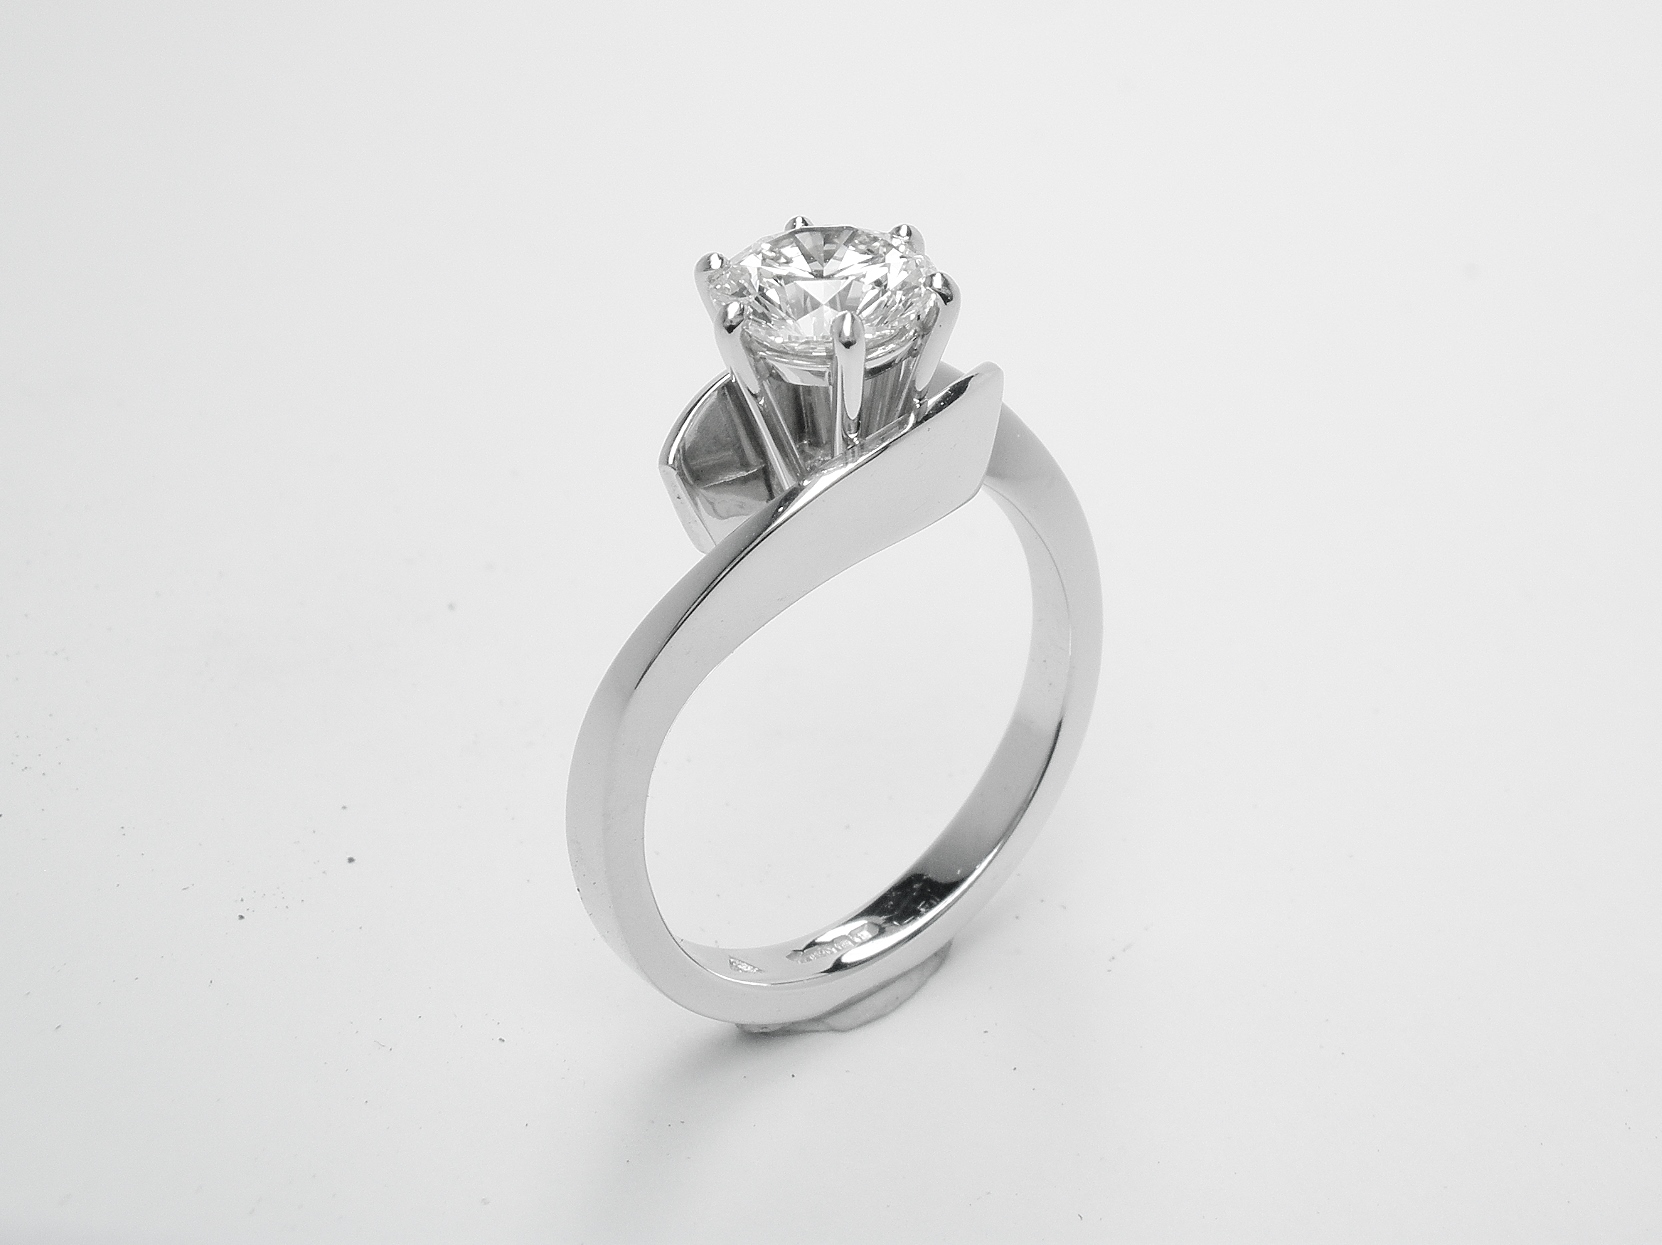 1.02ct. round brilliant cut diamond single stone open cross-over style ring mounted in platinum.